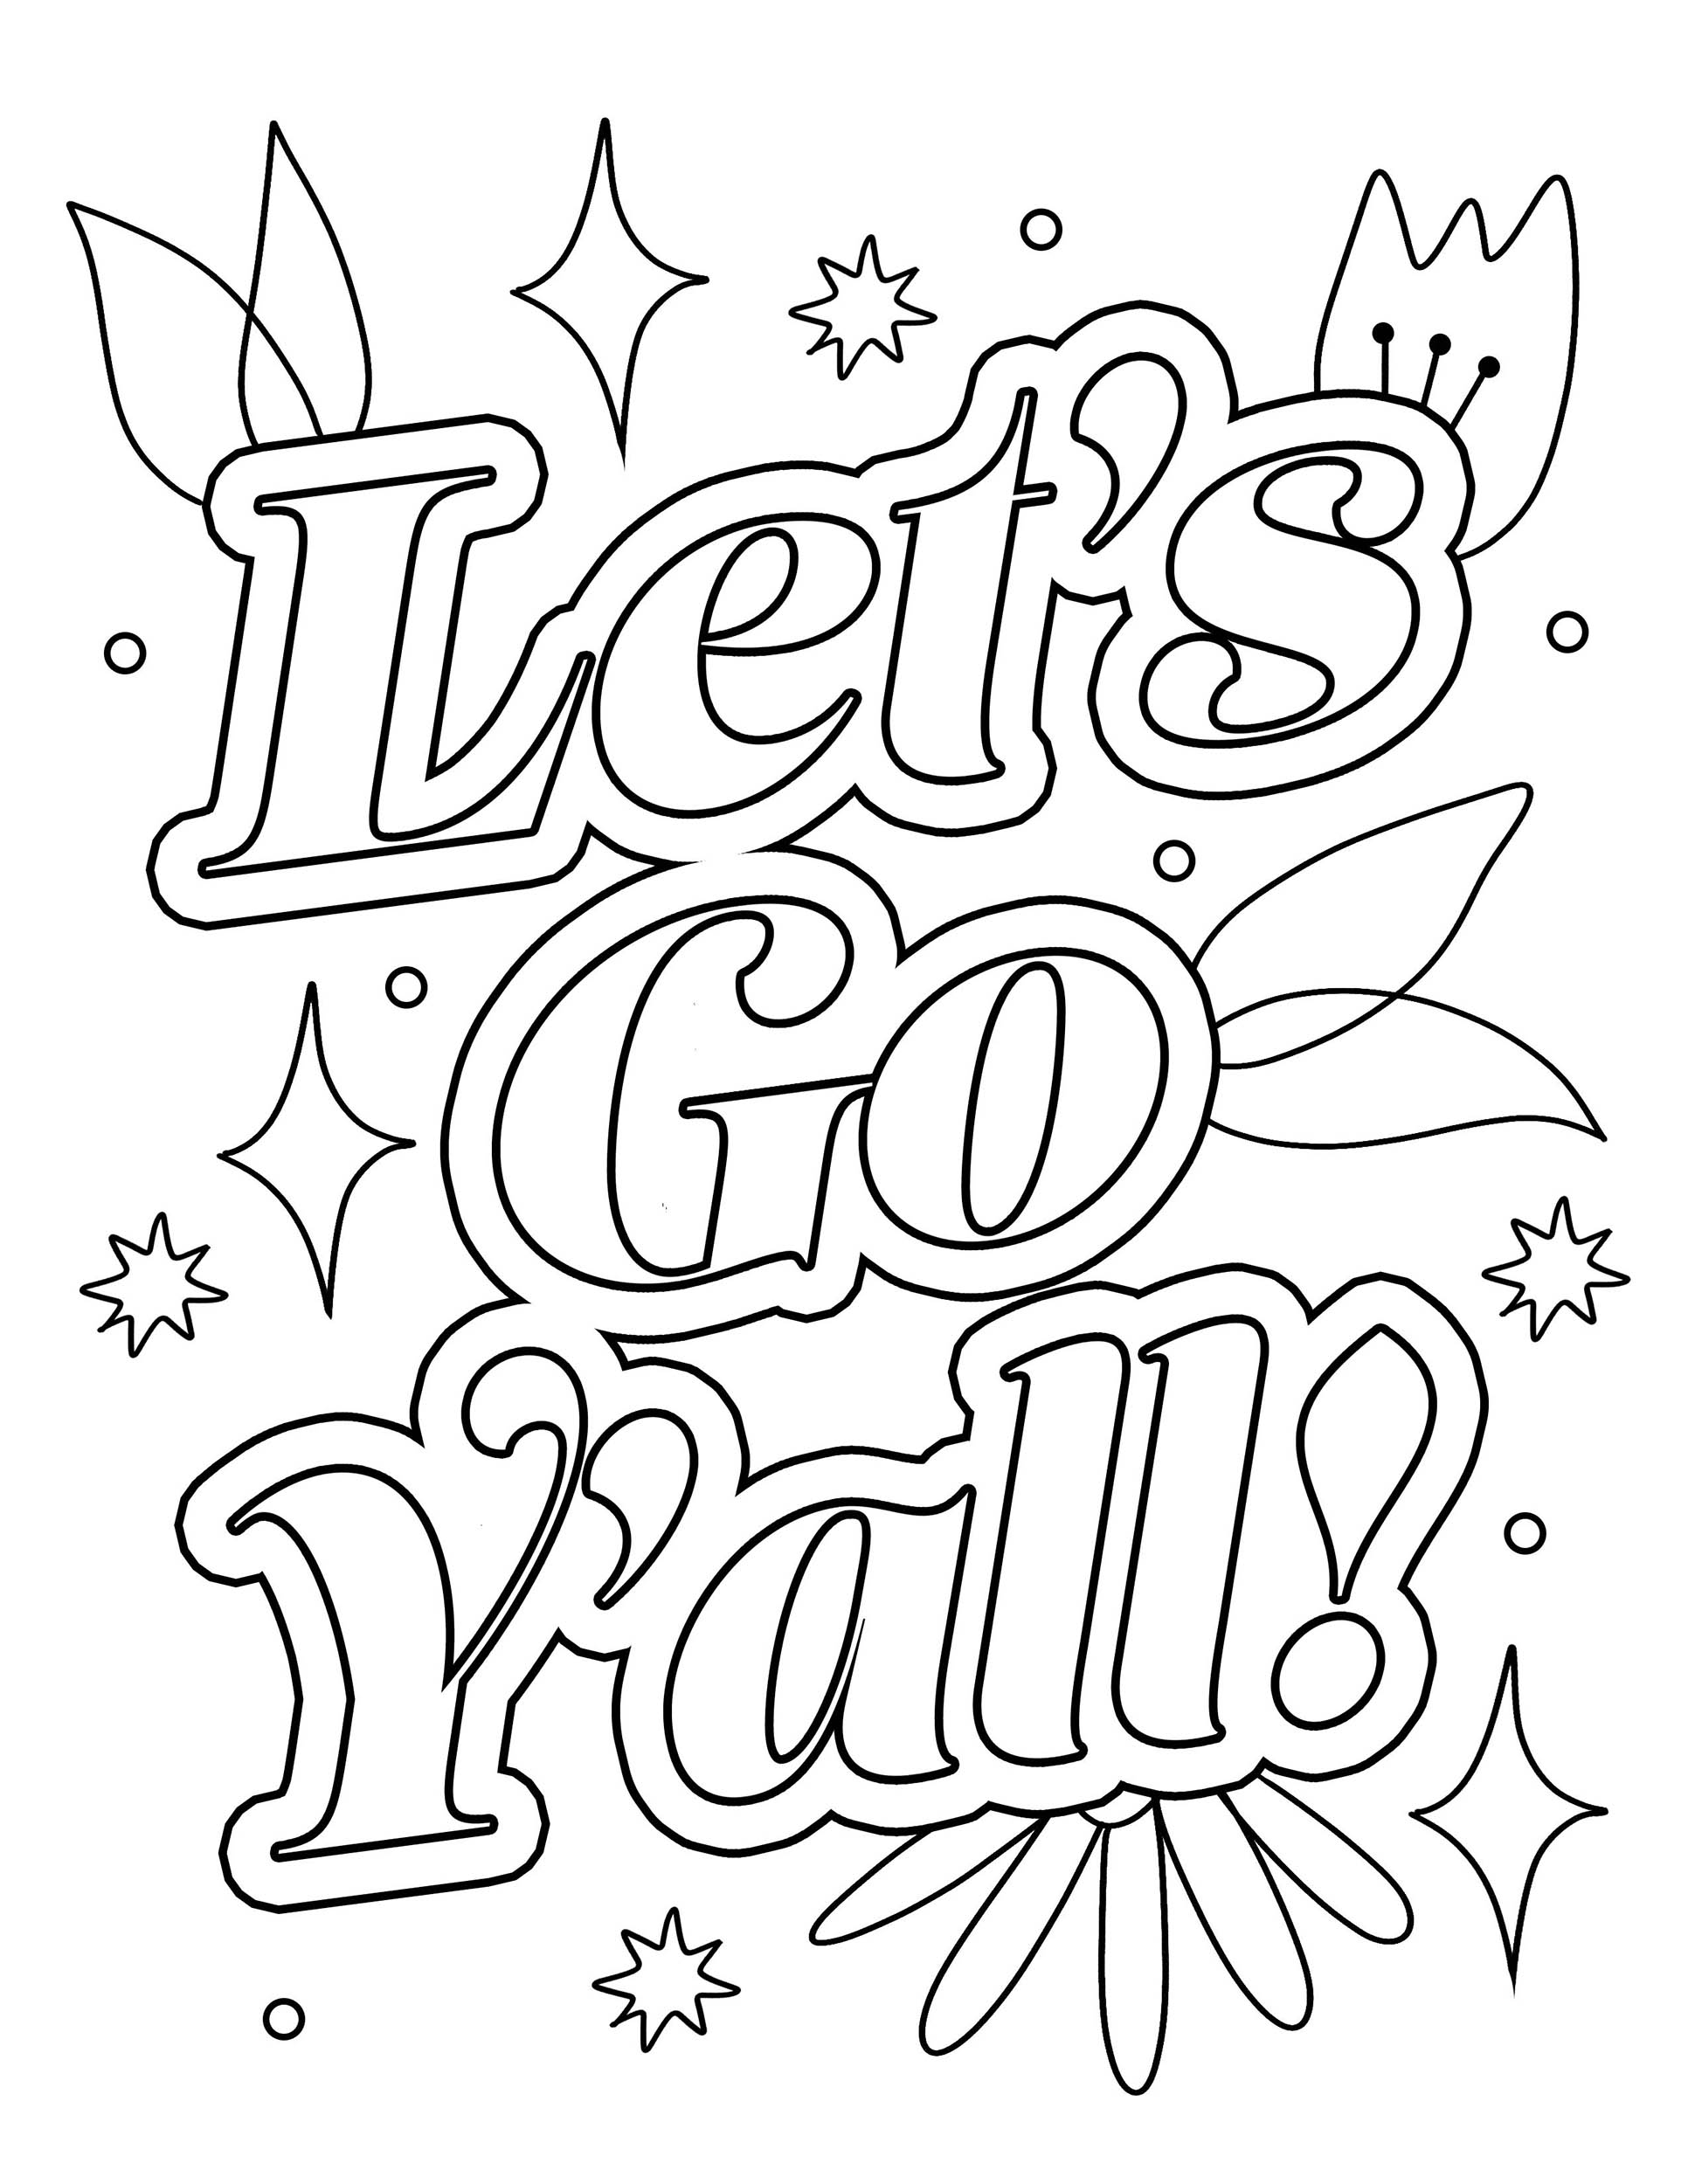 Download free printable coloring sheets - by TODAY show